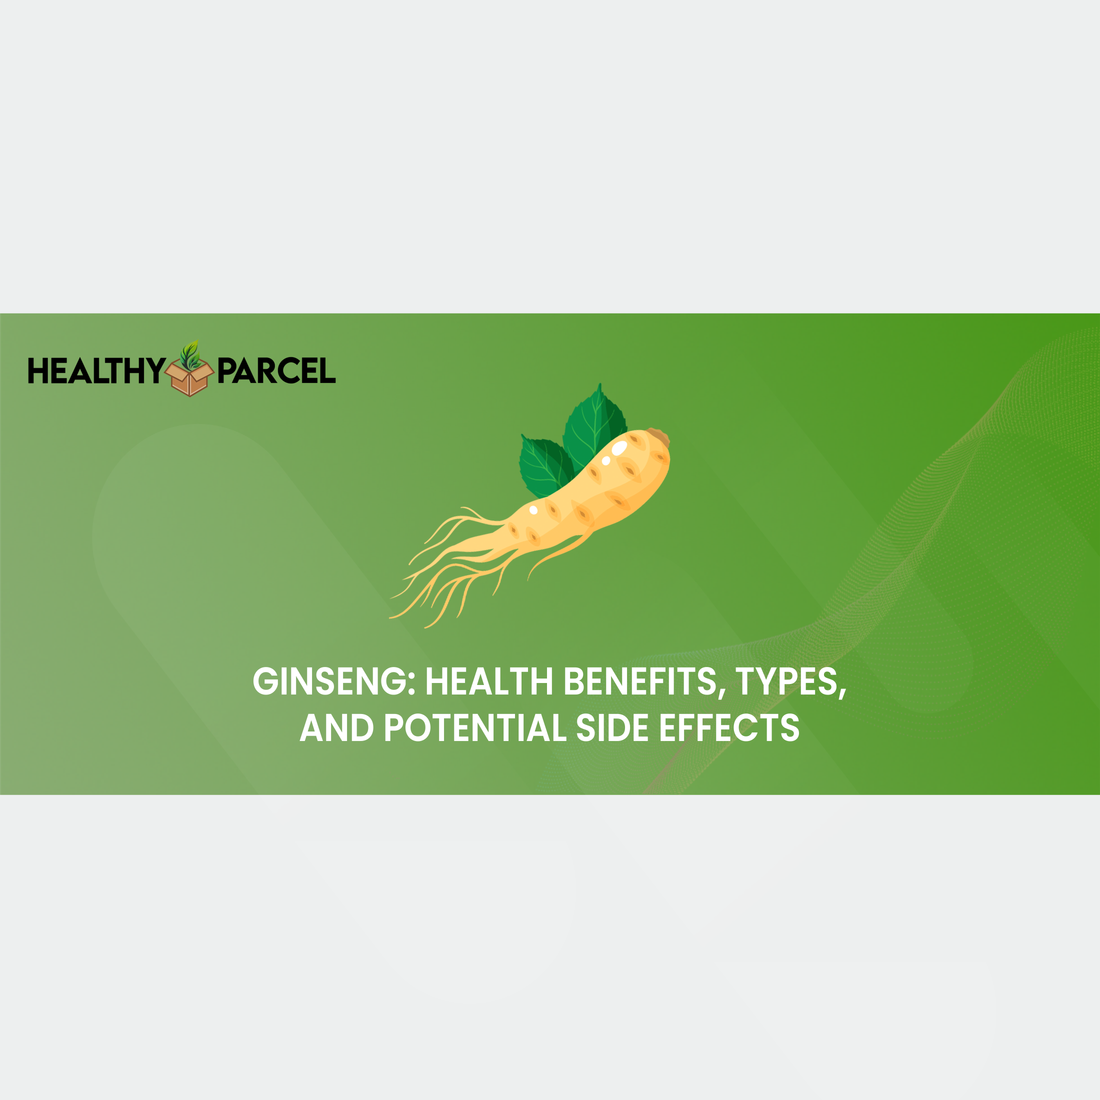 Ginseng Health Benefits, Types, and Potential Side Effects